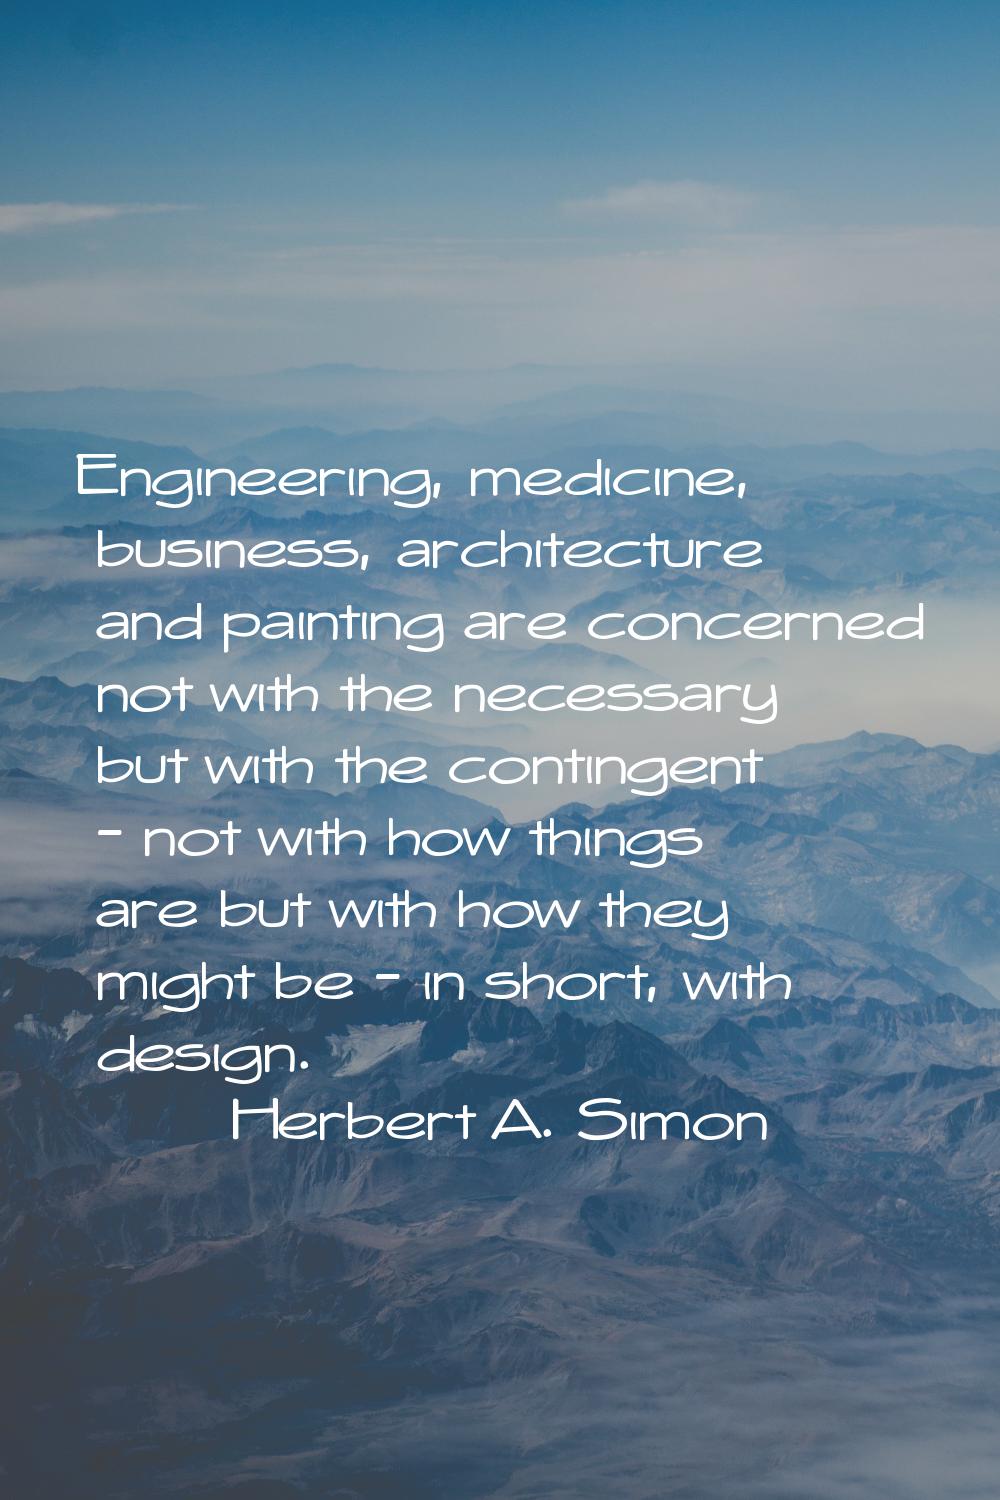 Engineering, medicine, business, architecture and painting are concerned not with the necessary but